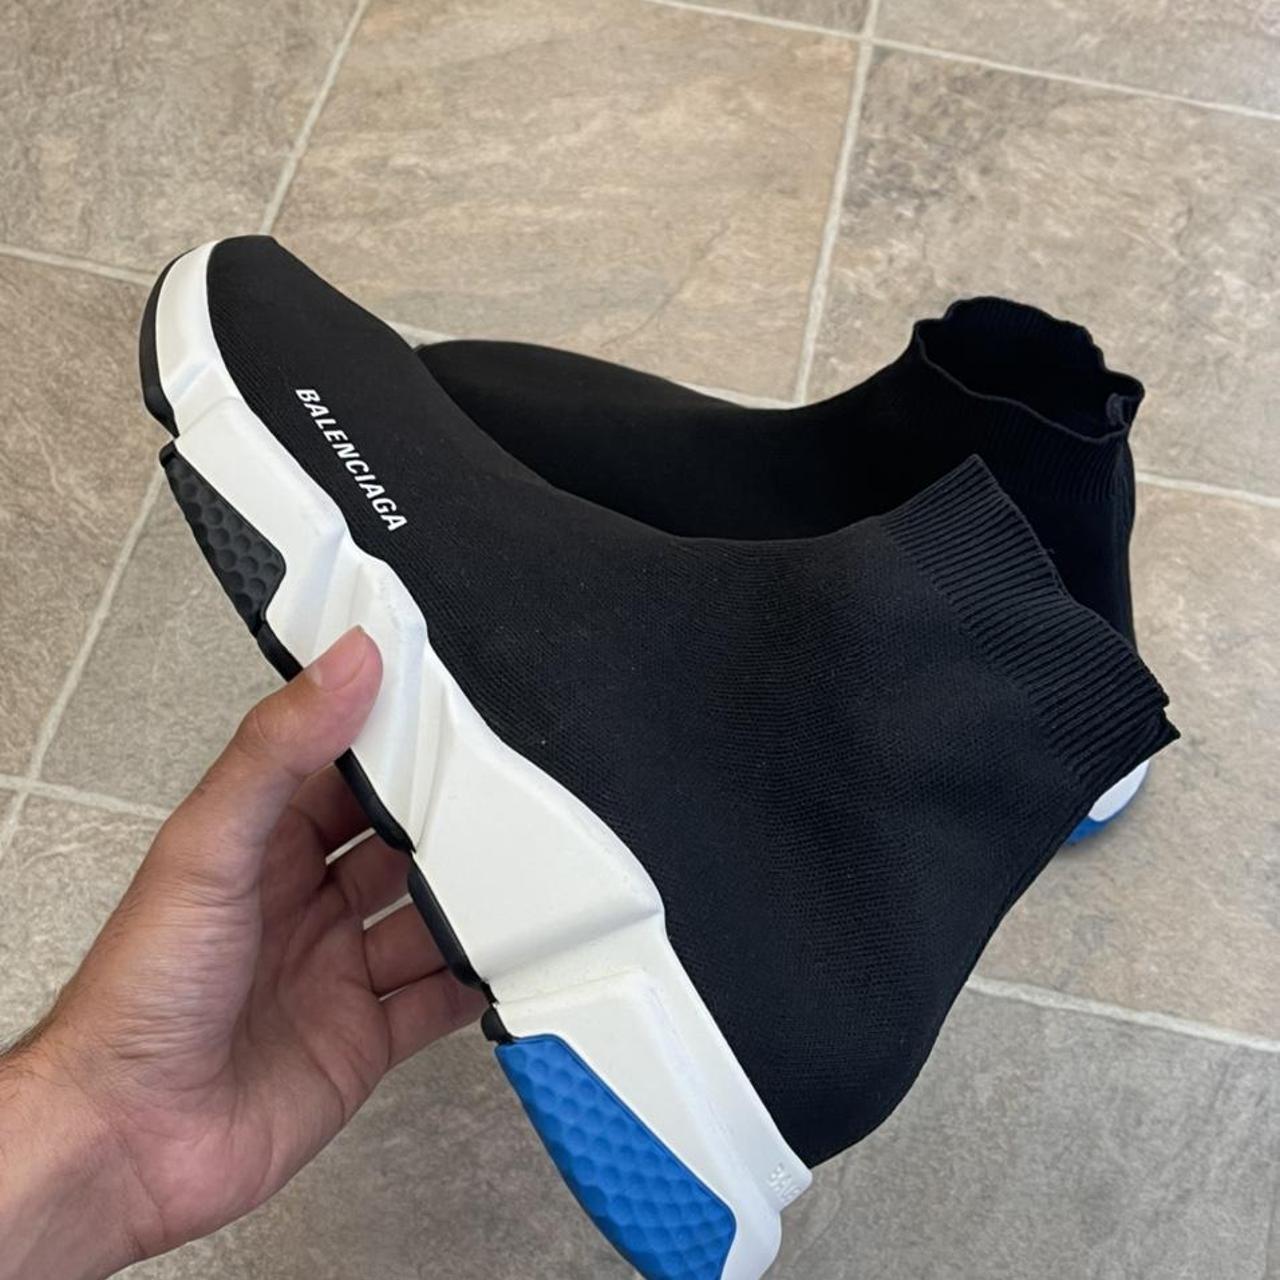 Solddddd balenciaga speed trainers runners with blue...